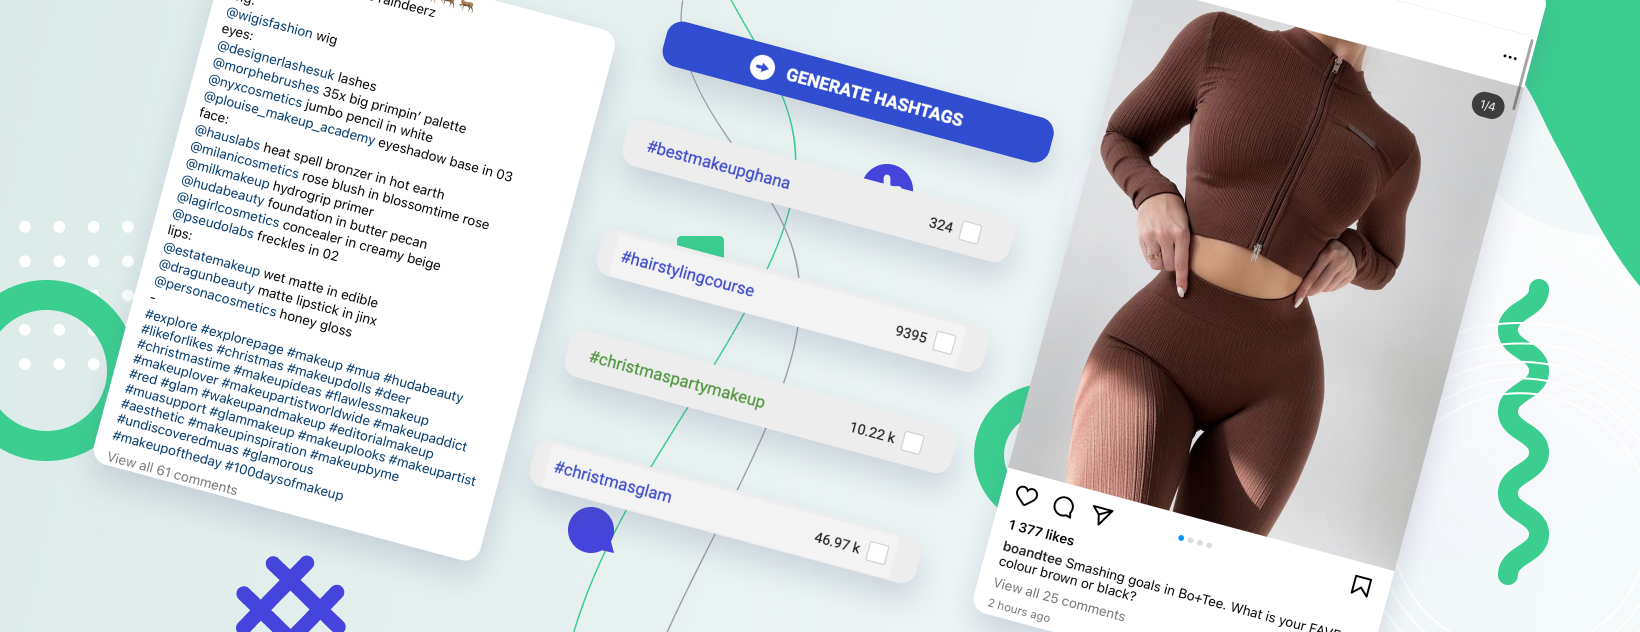 Instagram hashtag strategy for 2023 you haven't considered for growing your Instagram